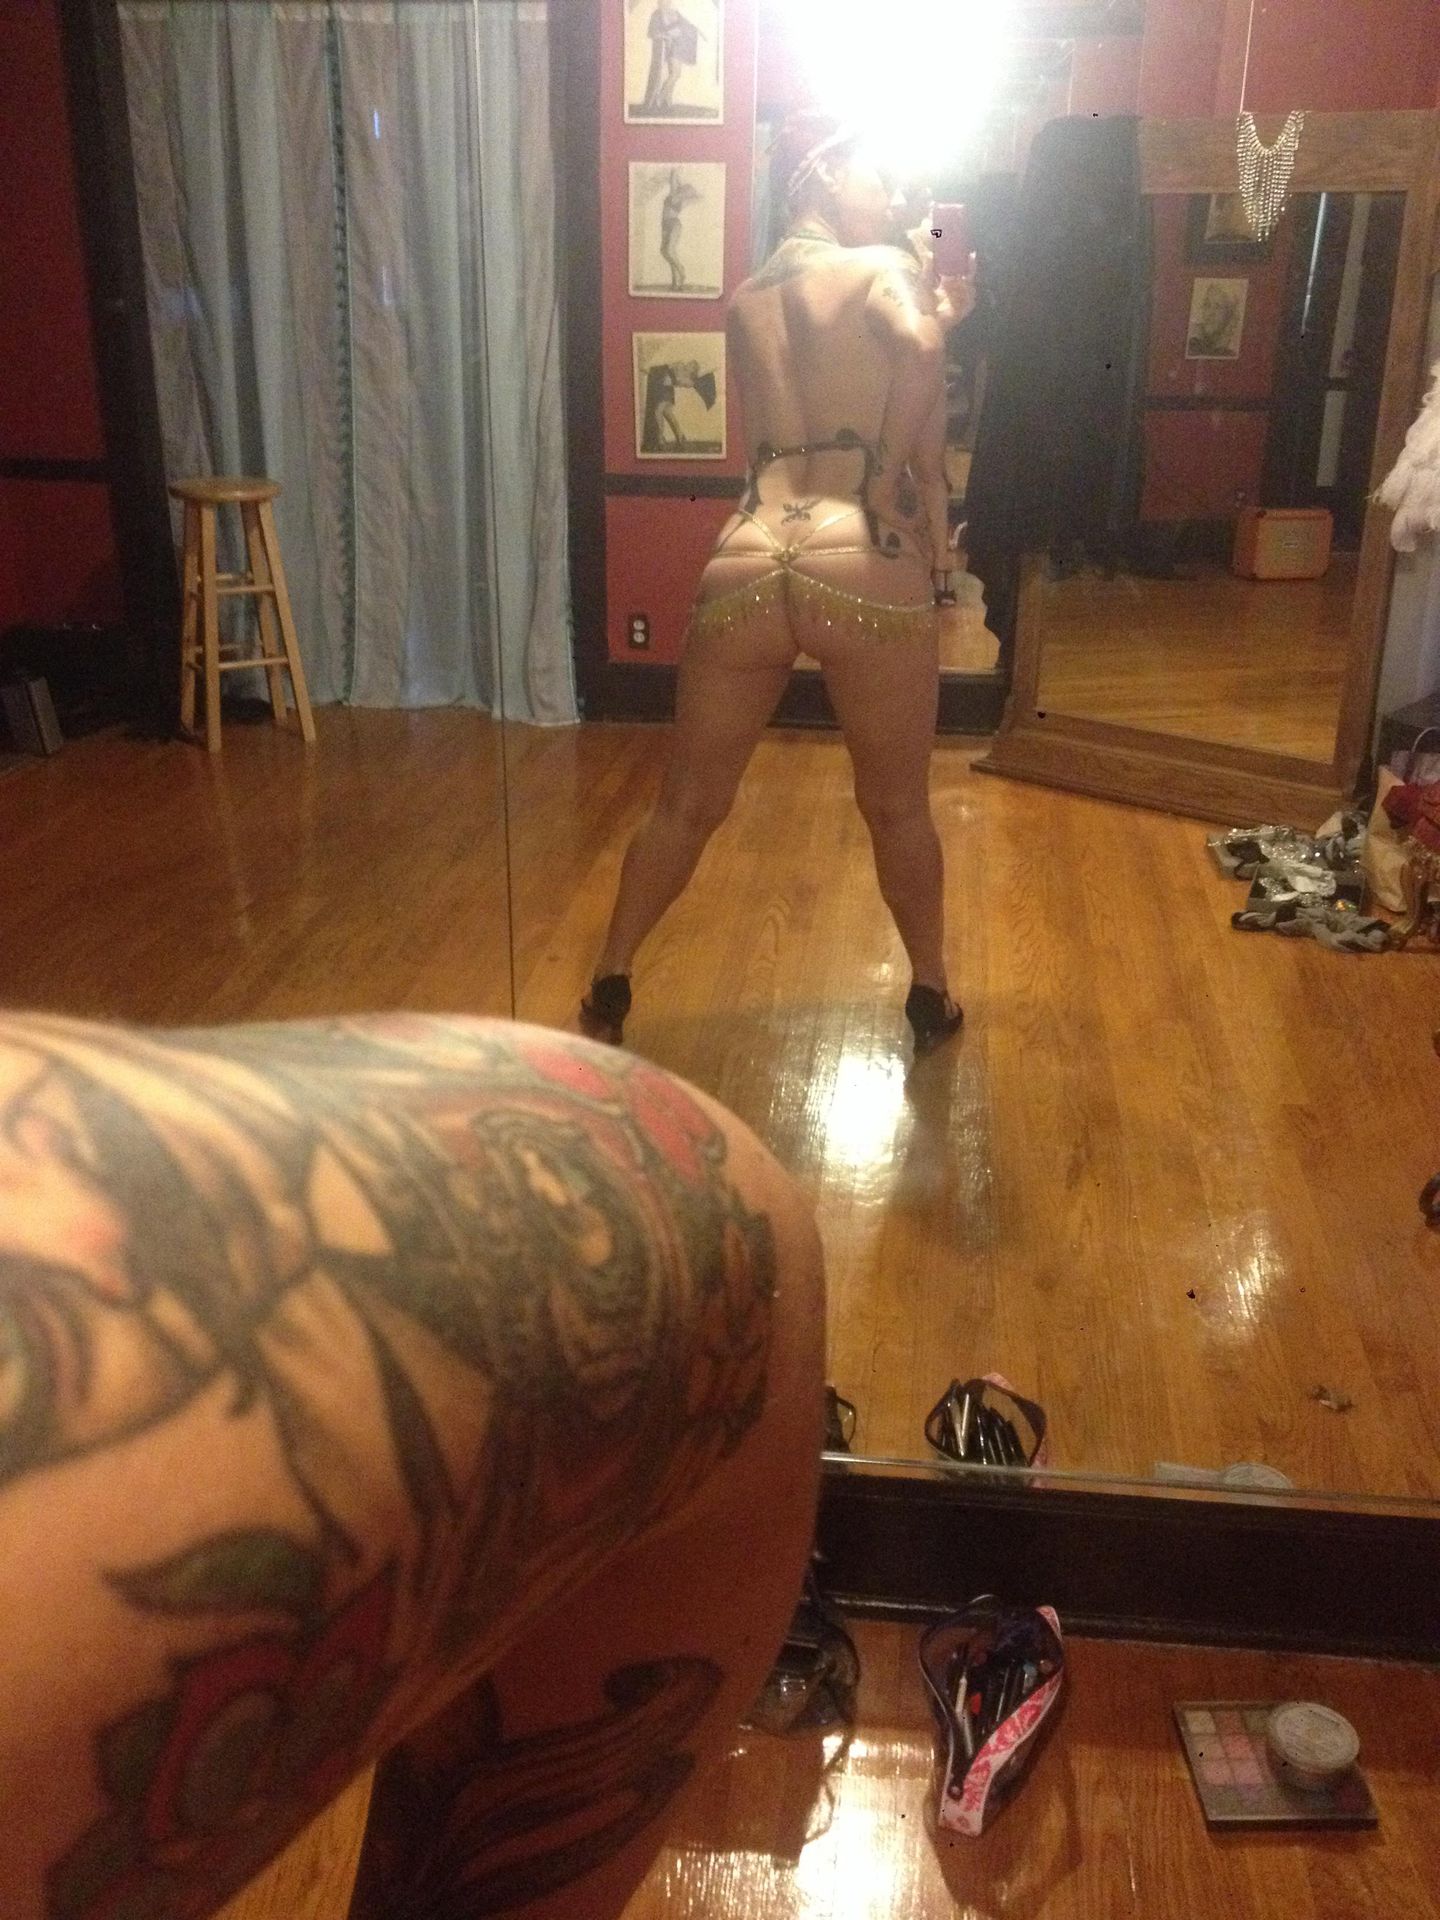 Danielle colby leaked photos